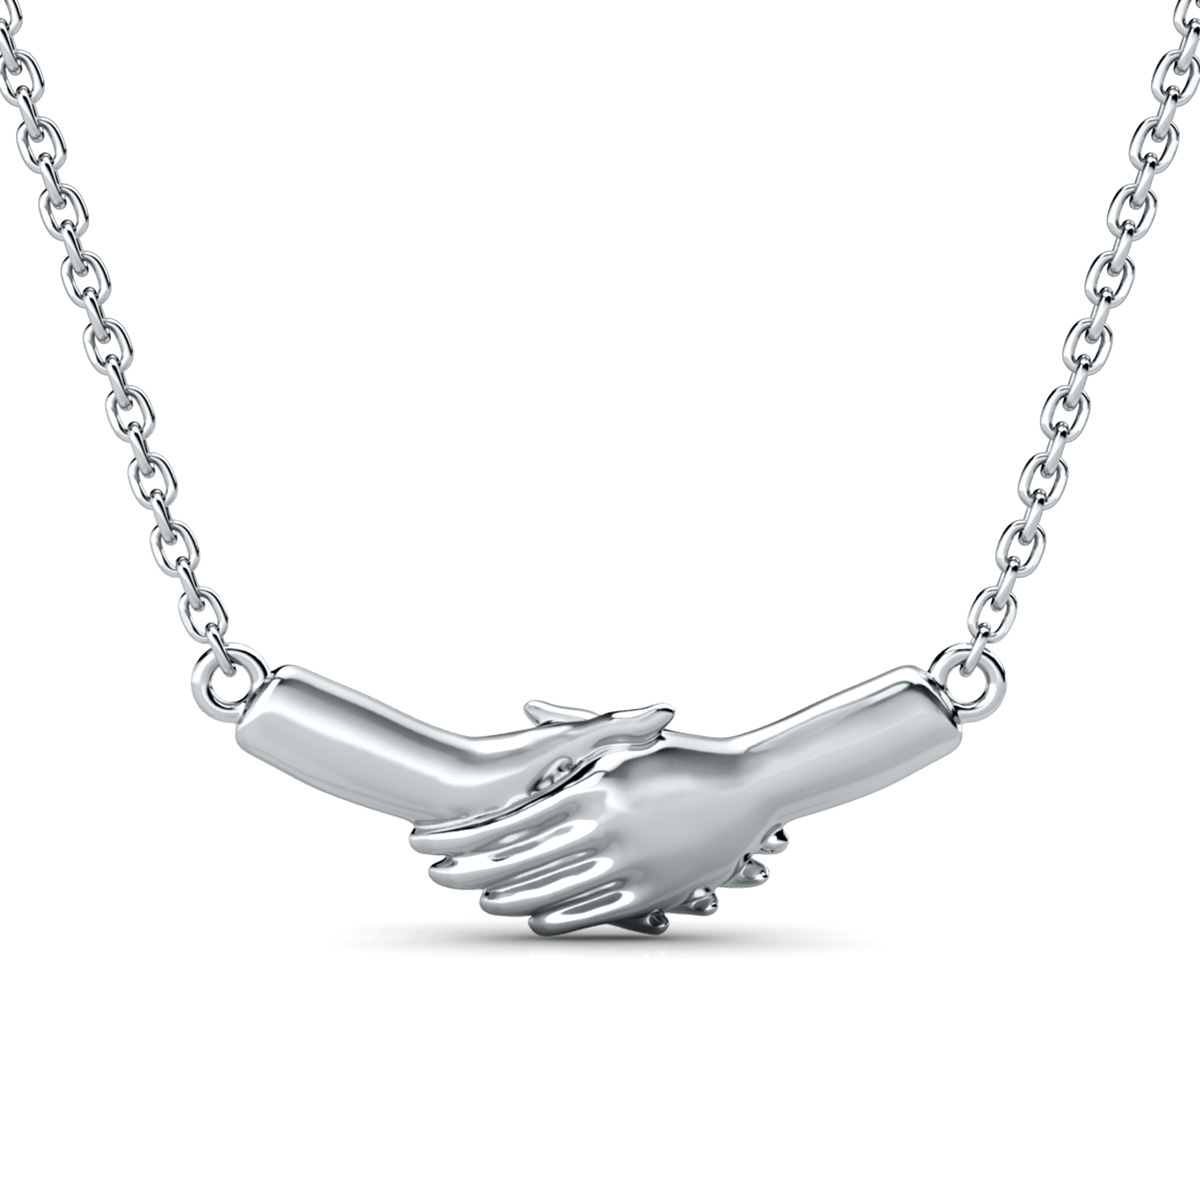 Ted Poley Miss Your Touch Interlocking Hand Necklace in .925 Sterling Silver